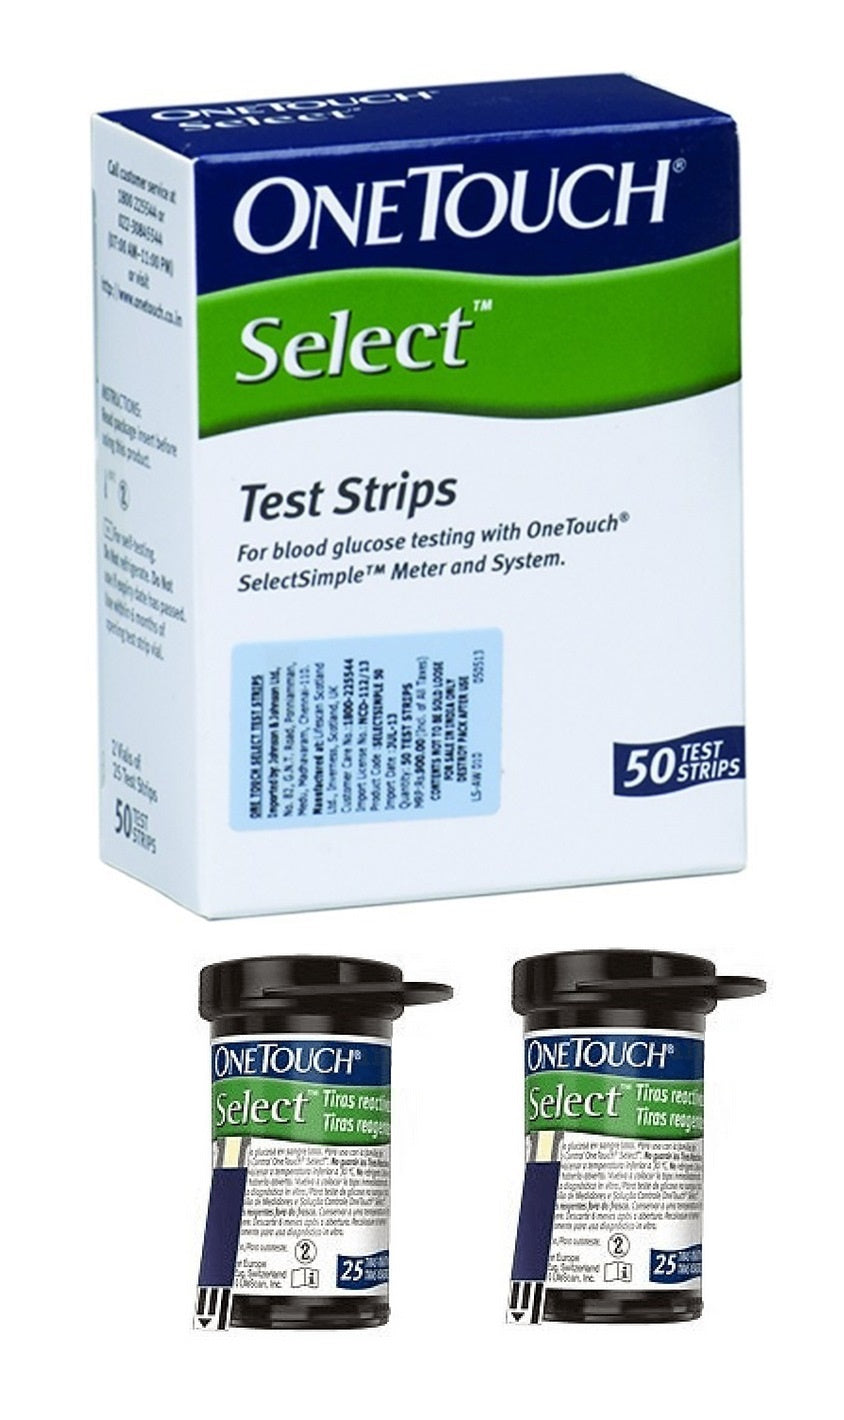 OneTouch Select Test Strips